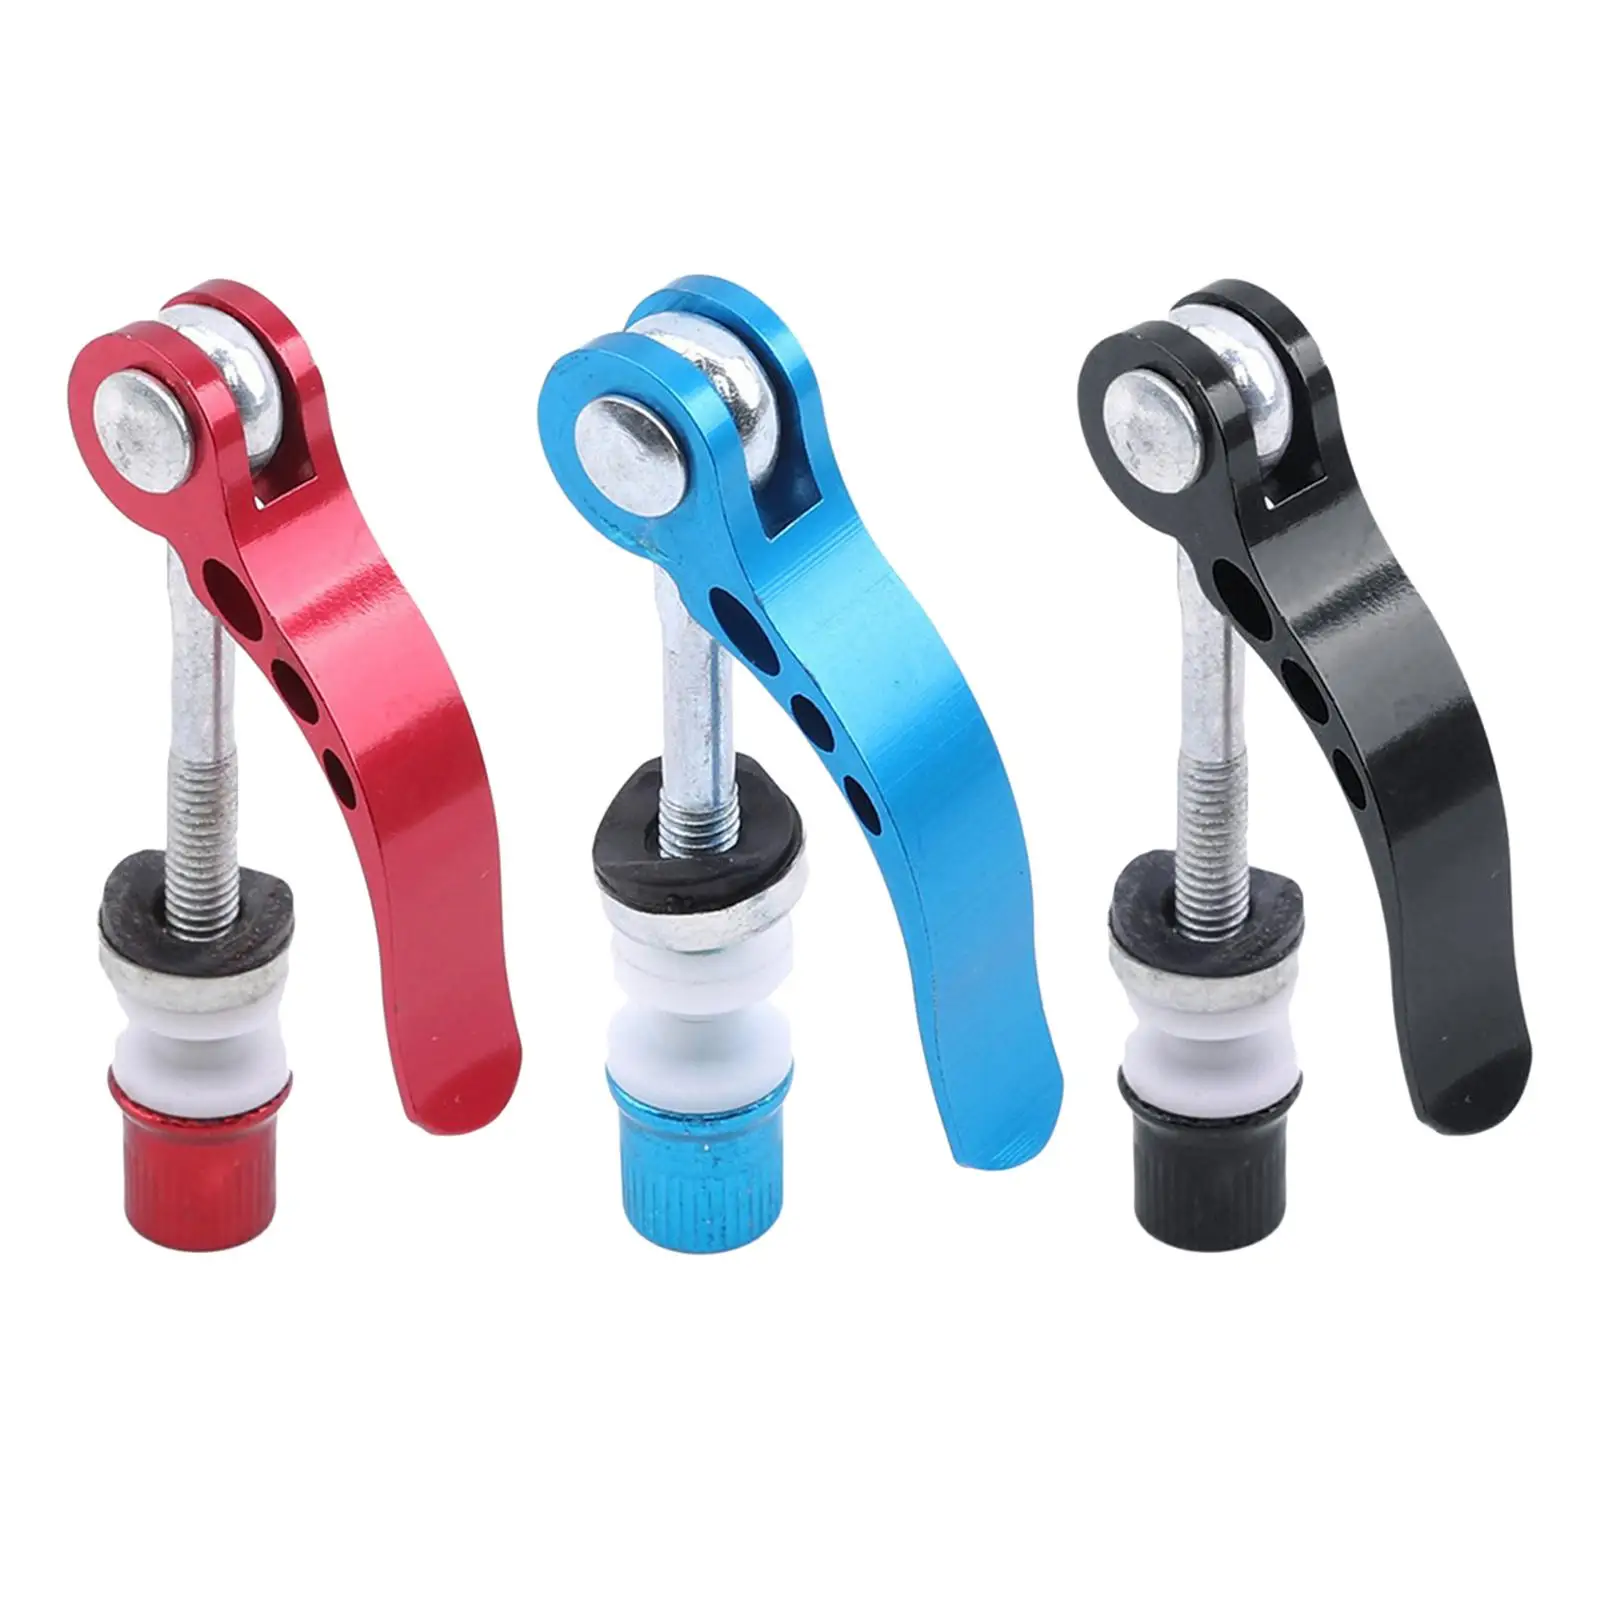 Bike Seatpost Clamp Bicycle Seatpost Clamp Tube Clamp Release Seatposts Clamp